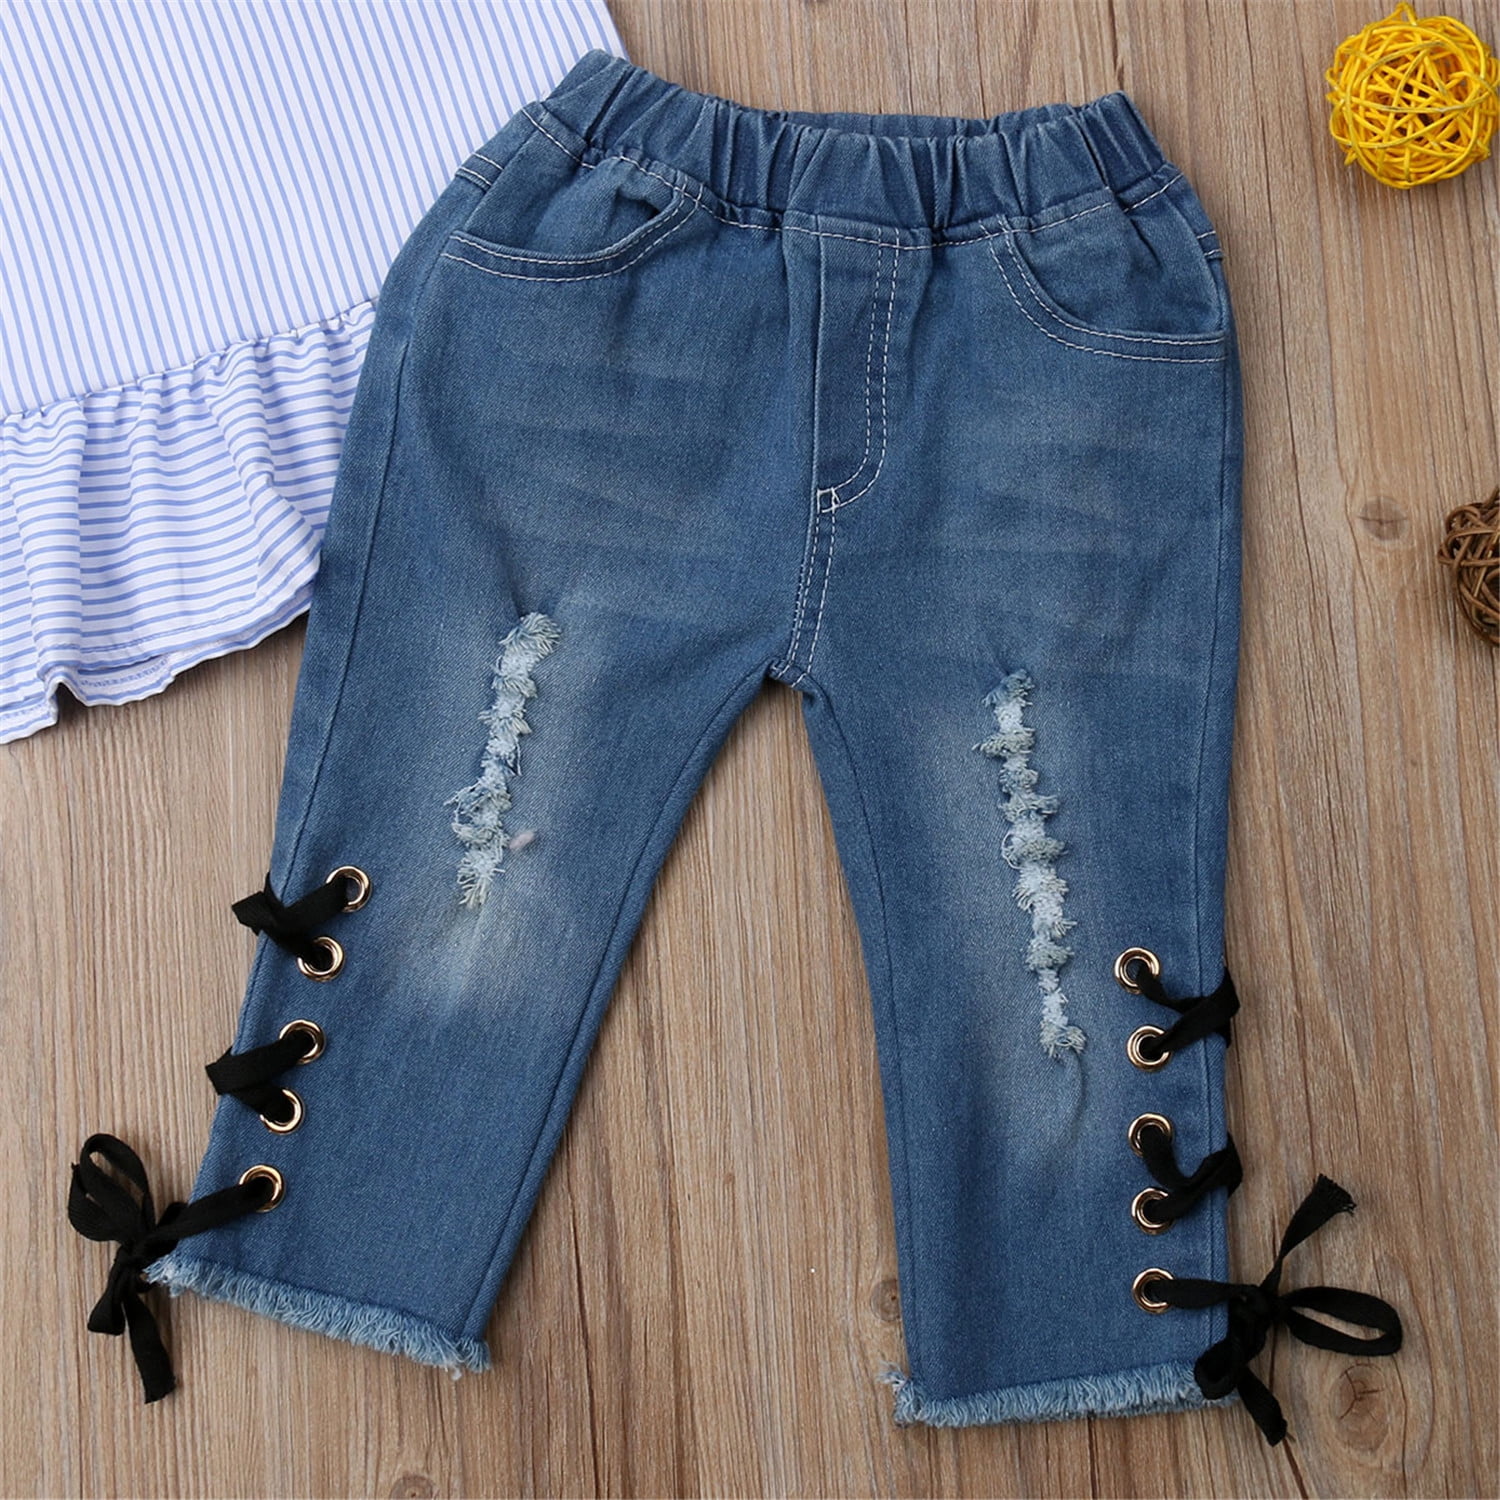 IZhansean Toddler Baby Girls Stripe Tops Shirt Ripped Denim Pants Jeans  Outfits Clothes Light Blue 18-24 Months